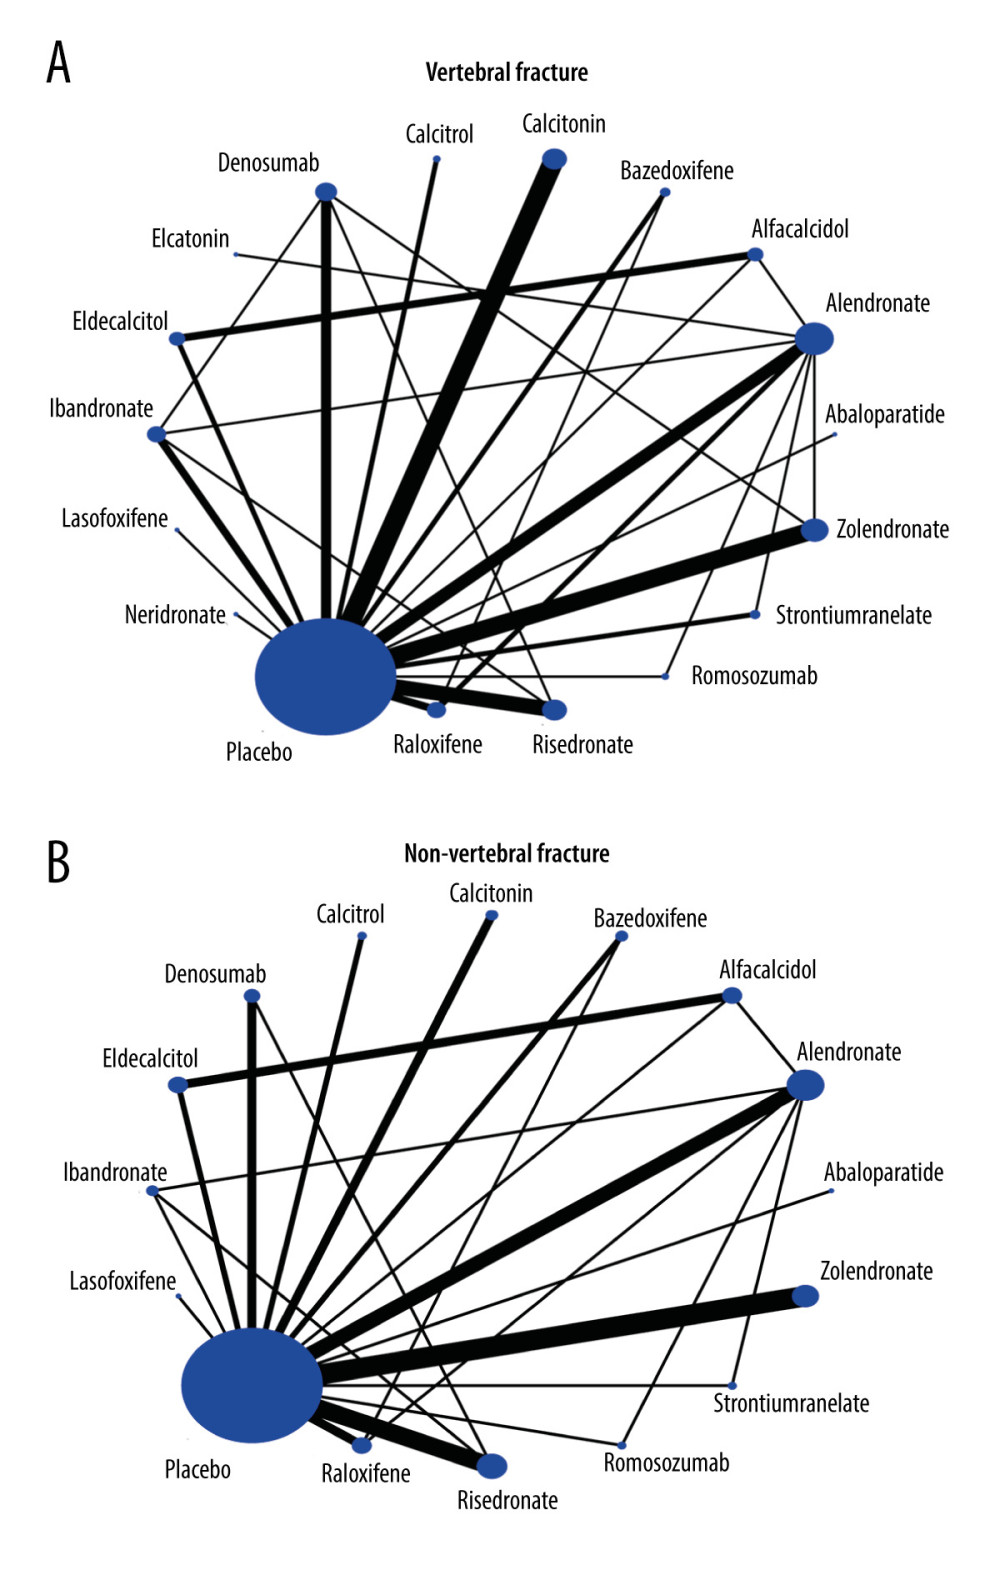 Network of comparisons for vertebral fracture (A) and non-vertebral fracture (B) included in the analysis, Stata software (version 12.0; Stata Corporation, College Station, TX, USA).